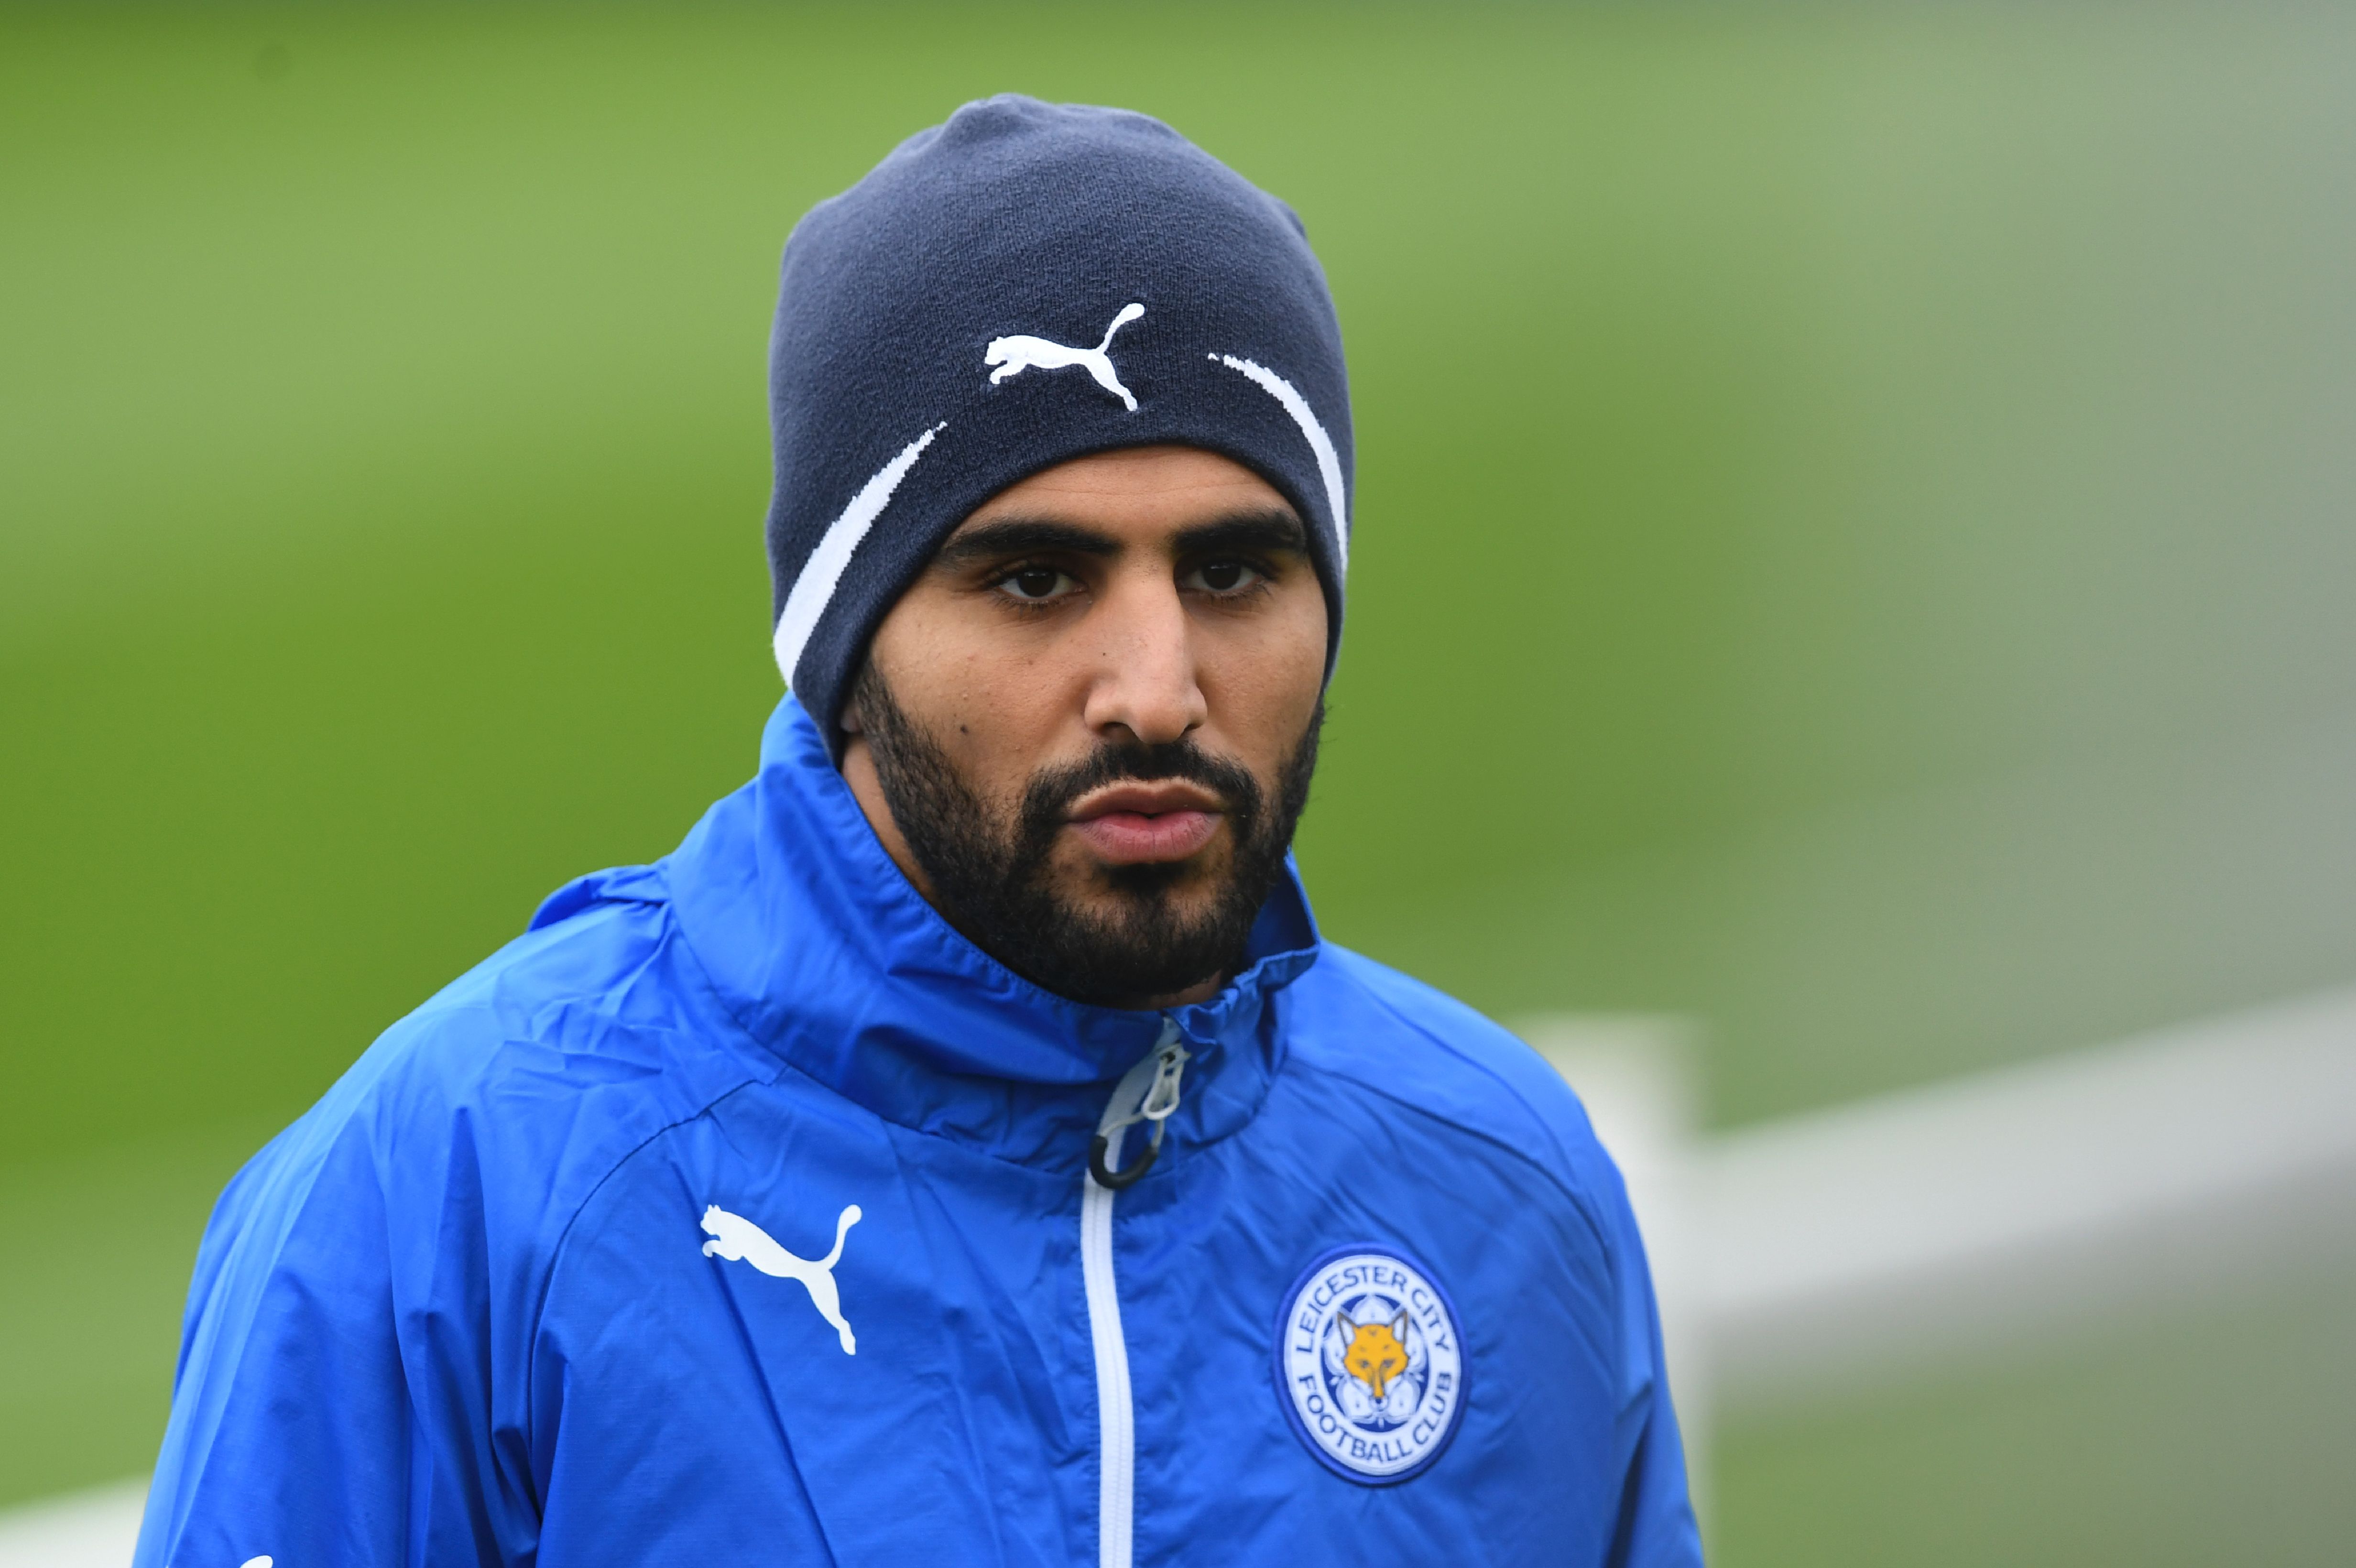 Leicester City's Algerian midfielder Riyad Mahrez attends a training session at Leicester City's training complex in Leicester, central England, on April 17, 2017 ahead of their UEFA Champions League quarter-final second leg football match against Spanish team Atletico Madrid on April 18. / AFP PHOTO / Paul ELLIS        (Photo credit should read PAUL ELLIS/AFP/Getty Images)